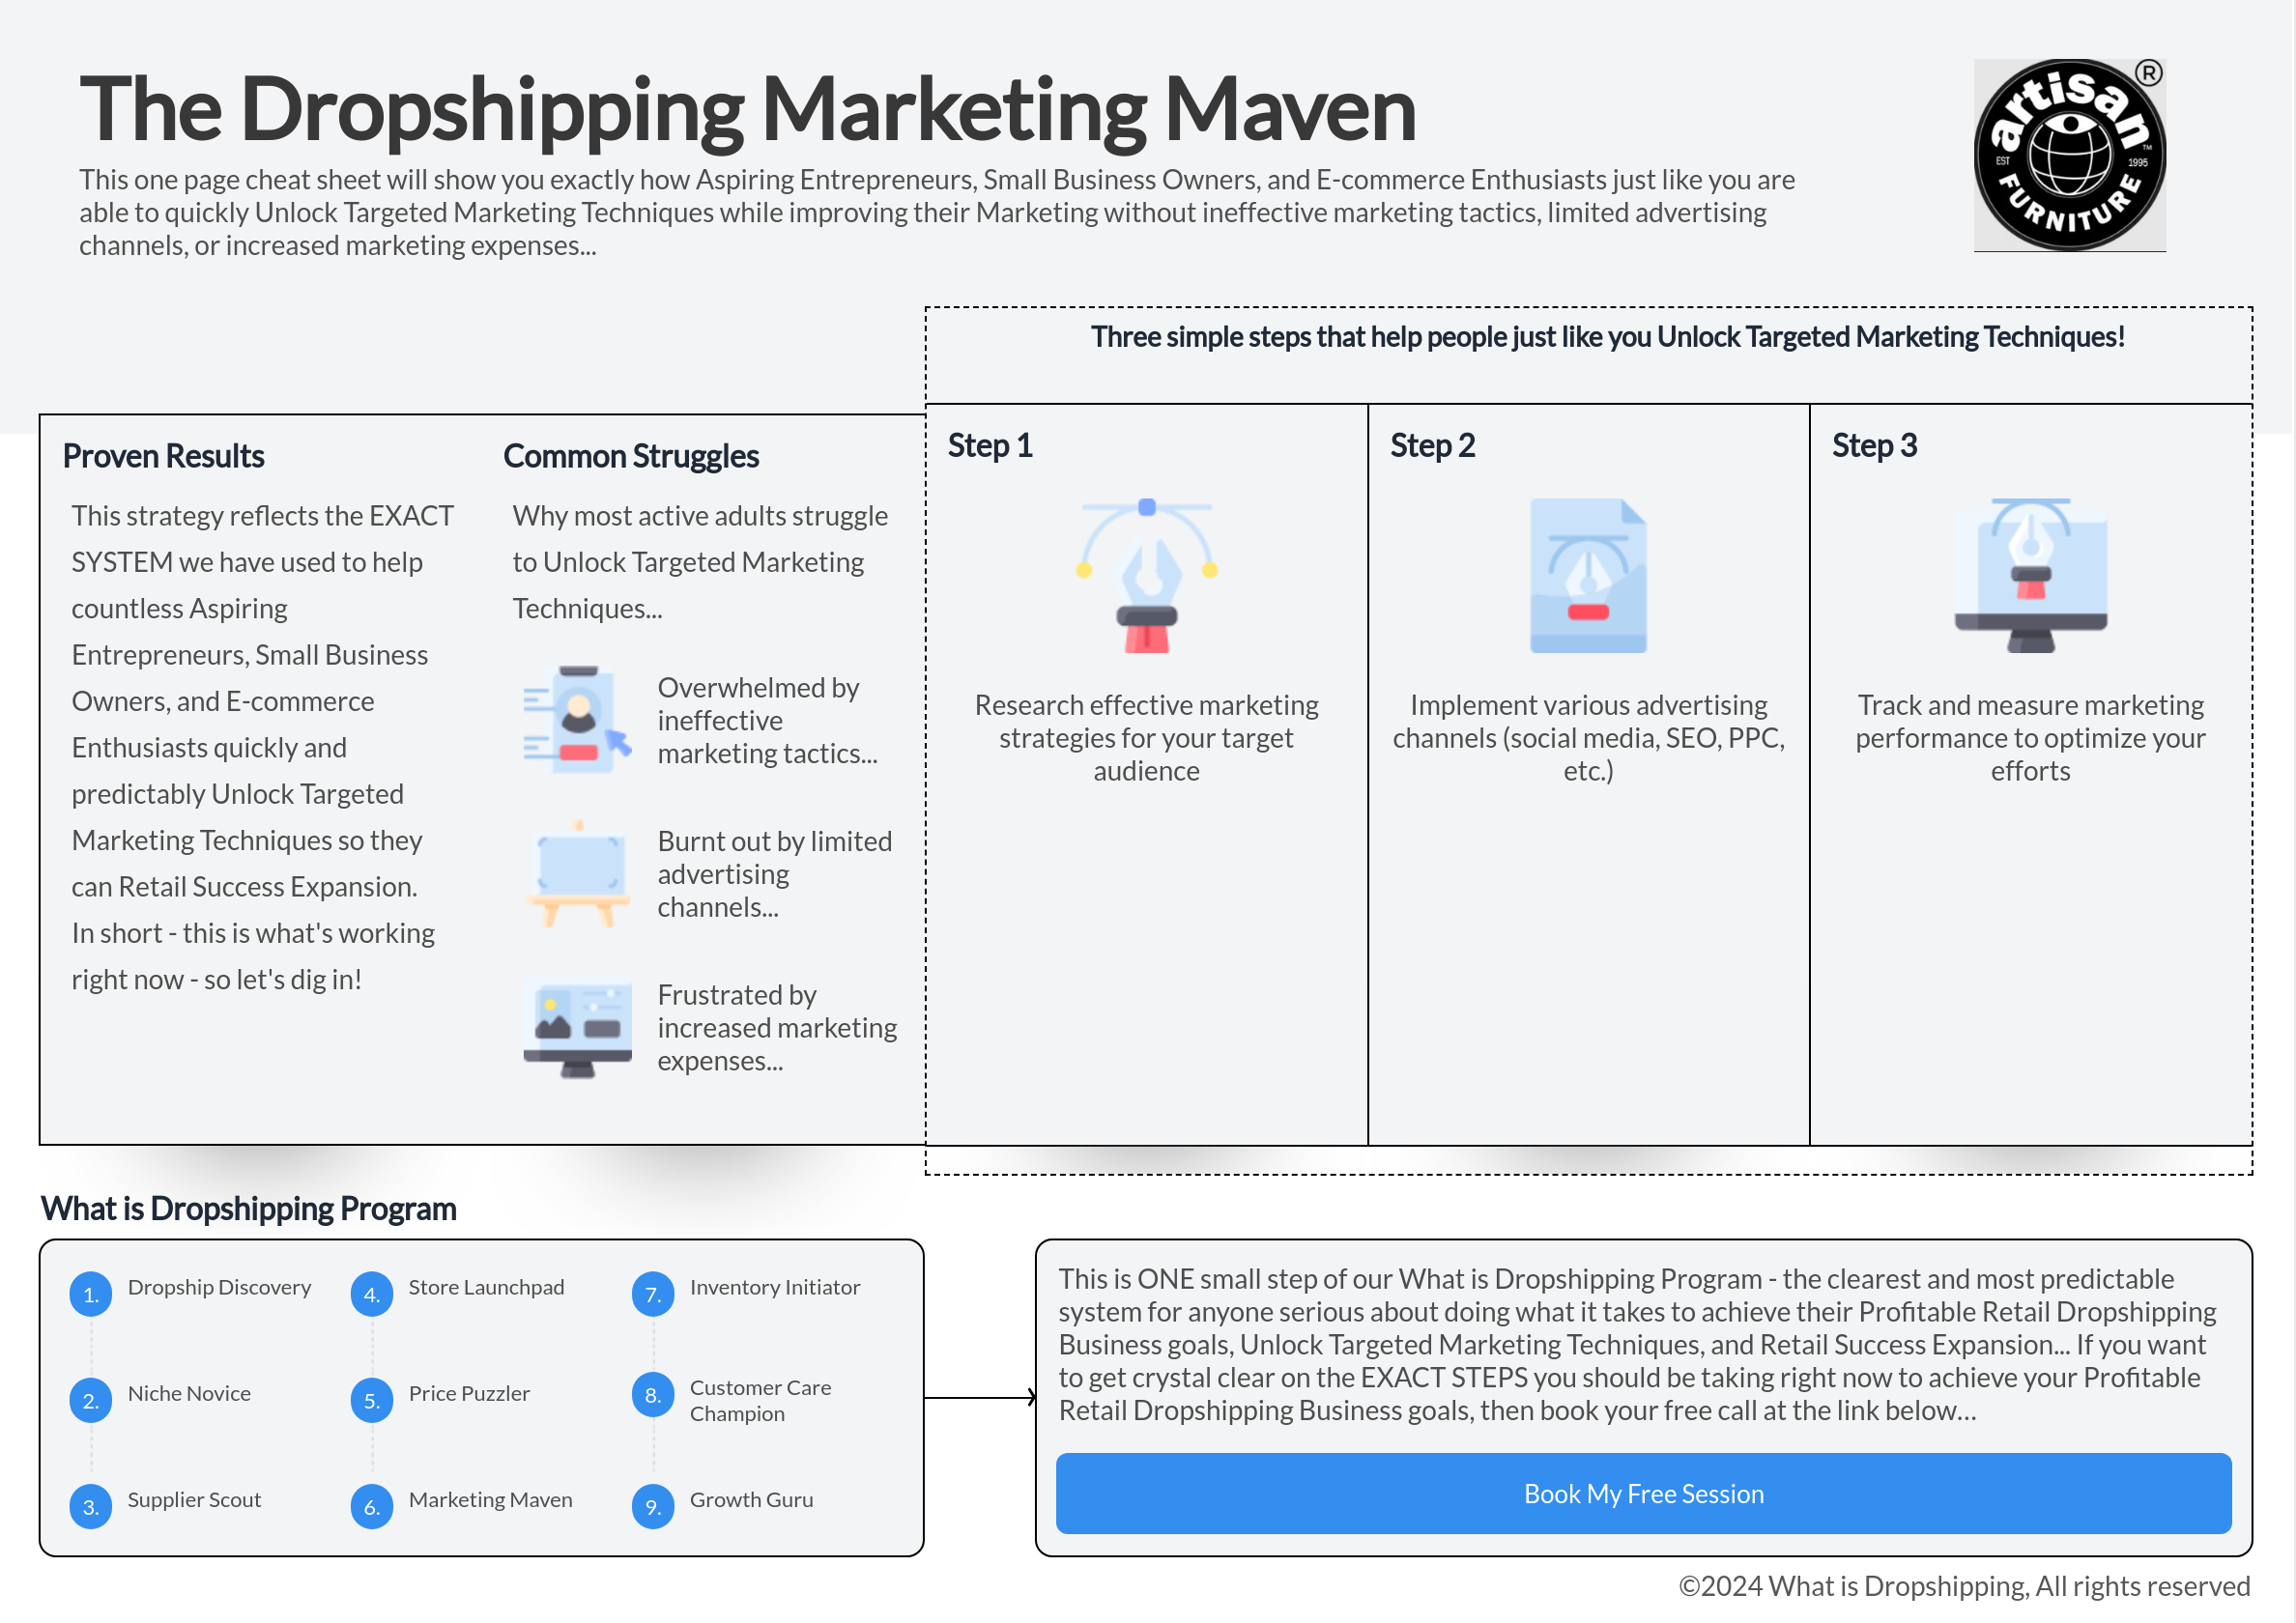 Infographic on dropshipping marketing strategies and steps.